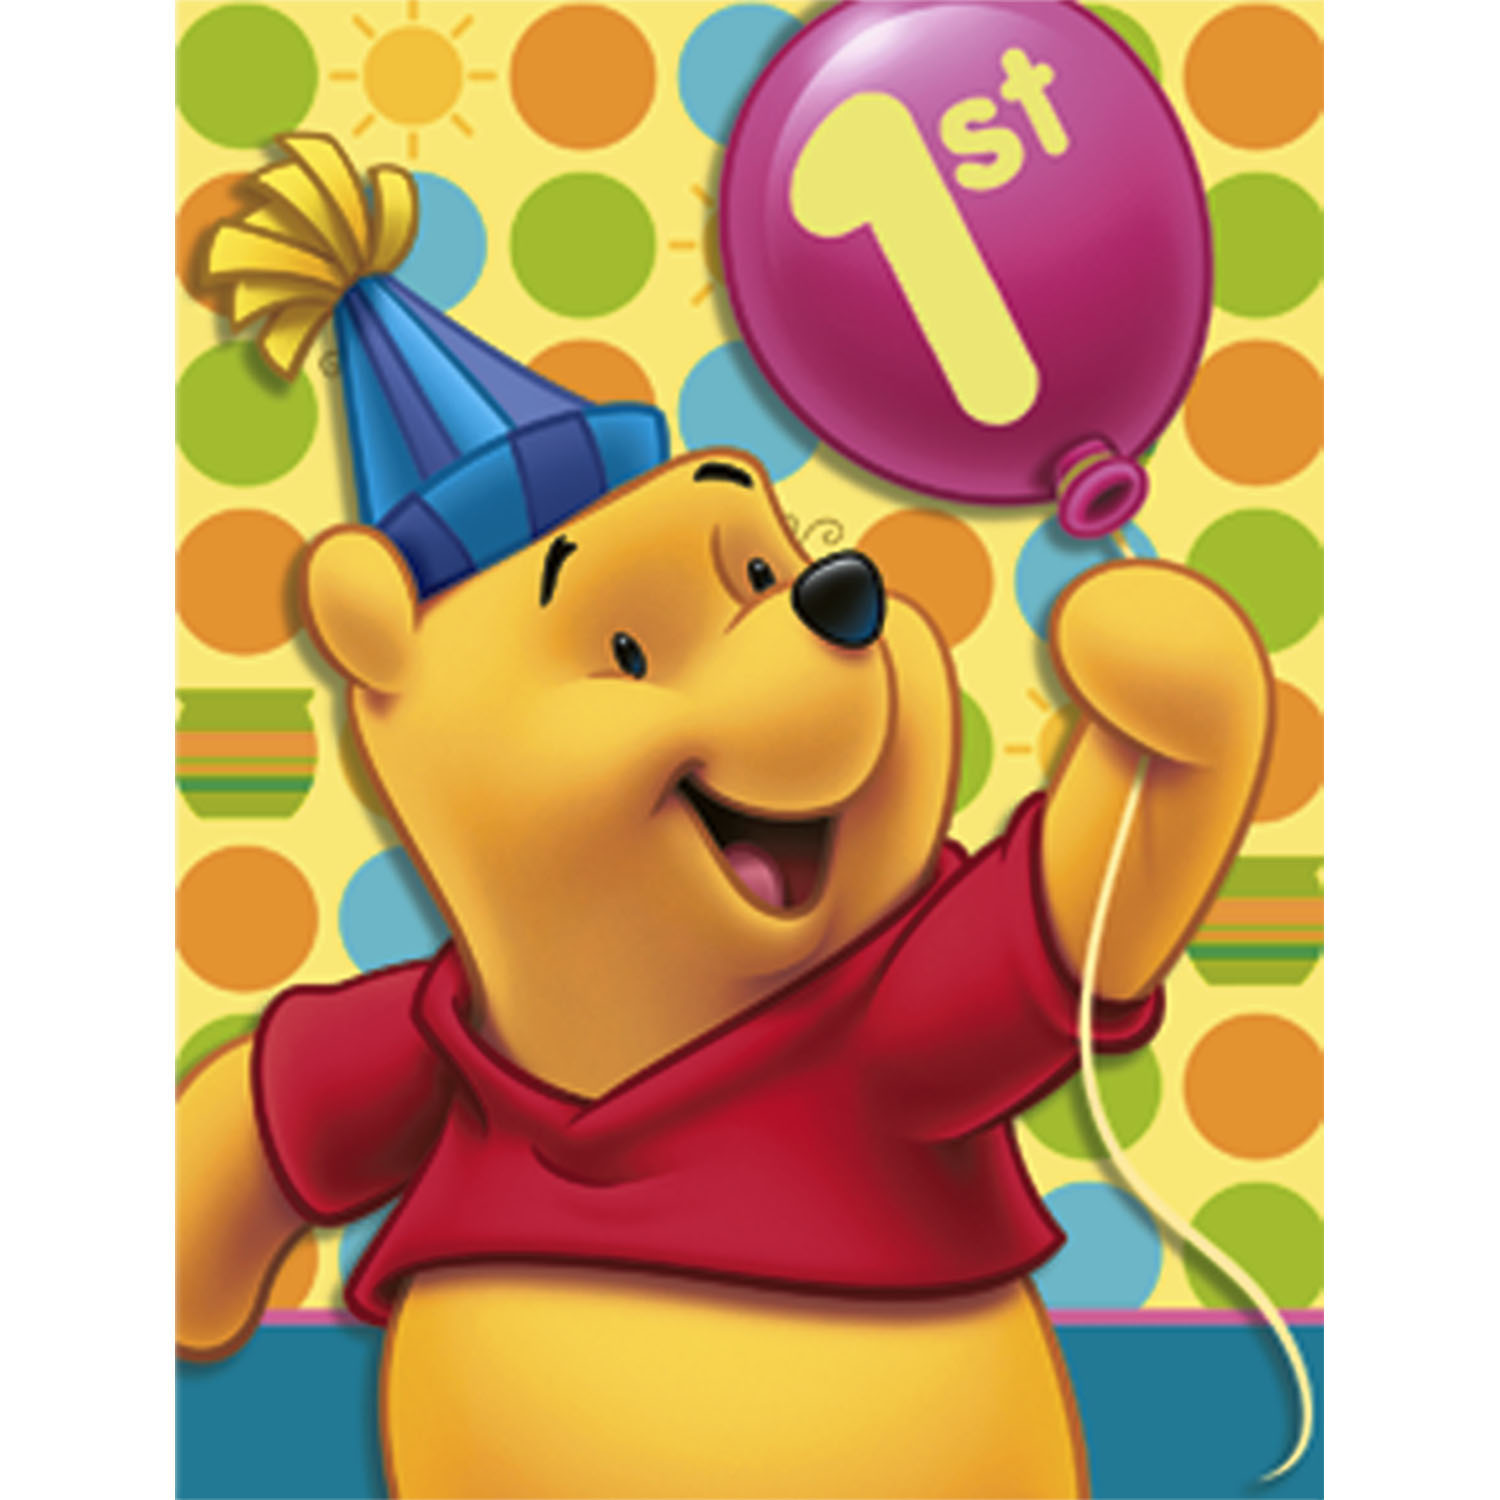 Pooh's 1st Birthday Invitation Cards 8pcs Party Accessories - Party Centre